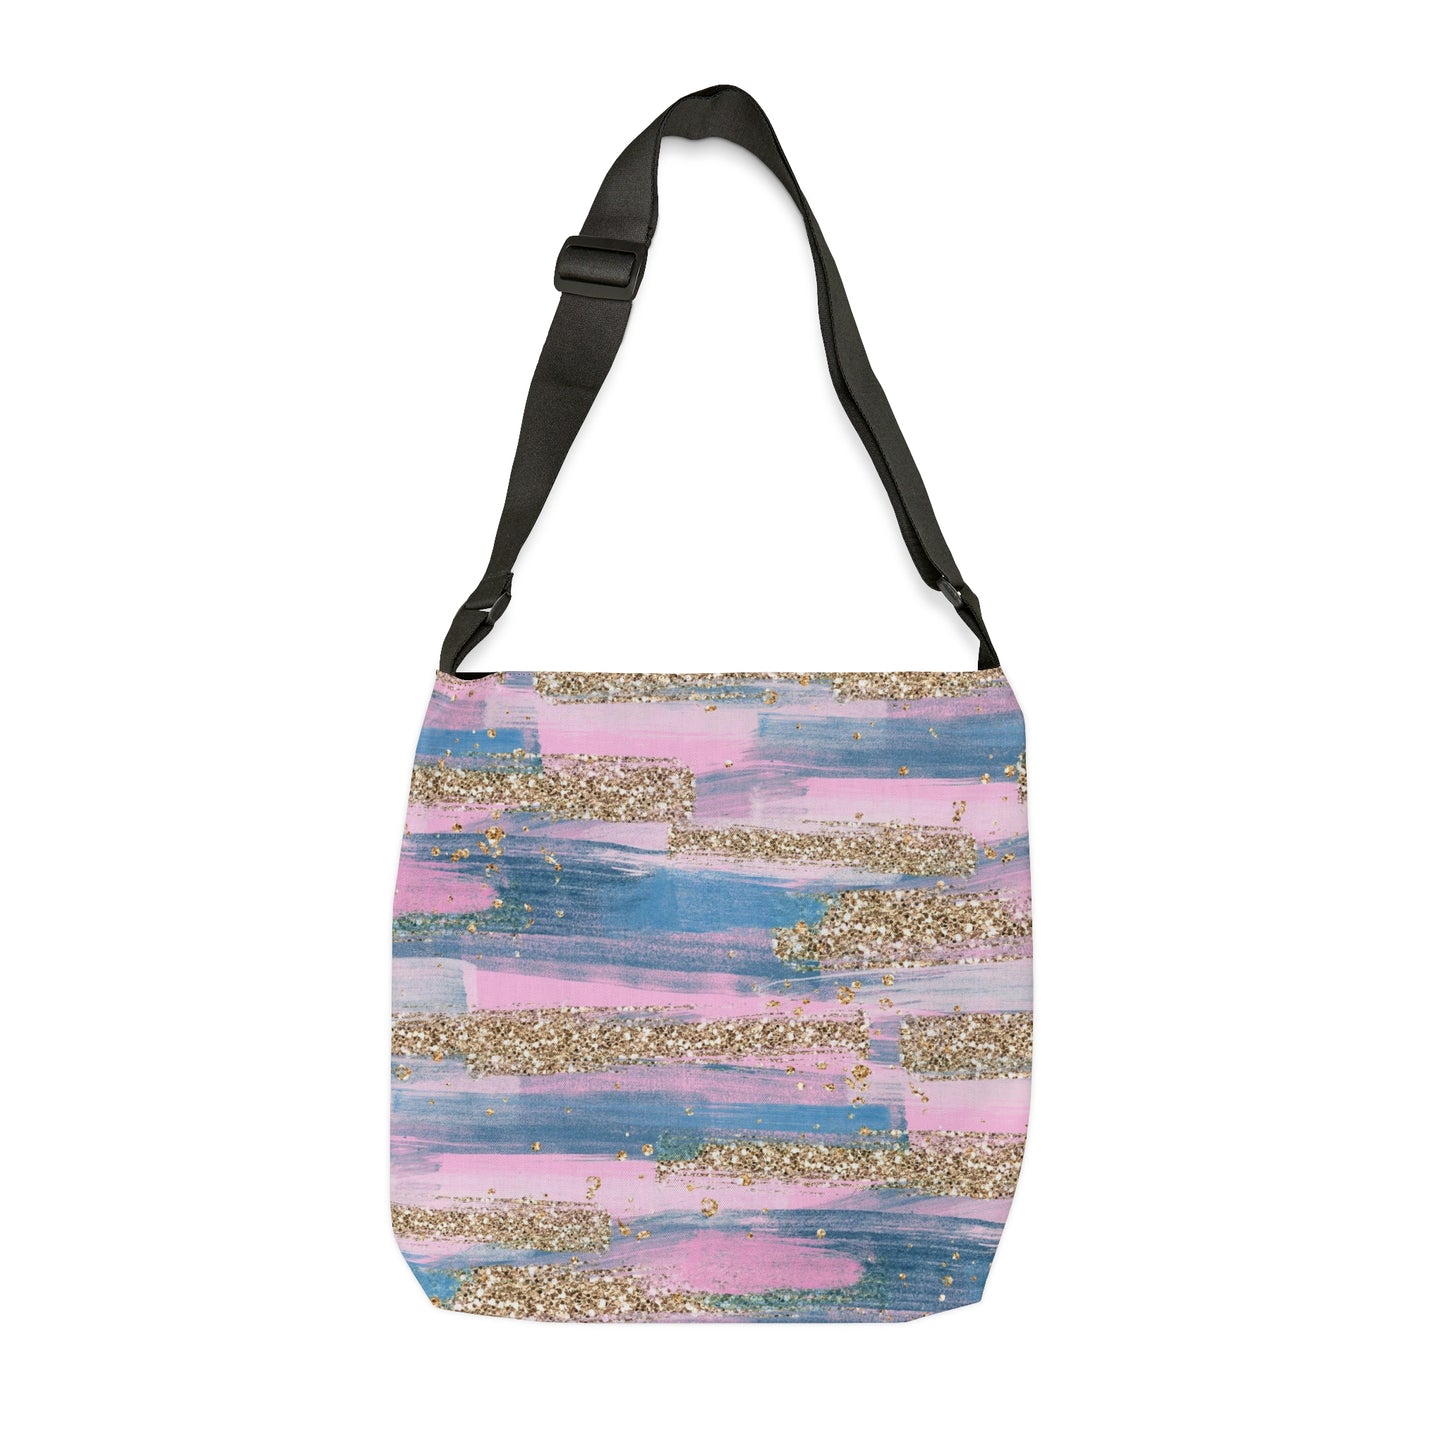 Glitter Weekender Bag for Women, Glitter Tote Bag, Adjustable Zippered Tote Bag With Pockets, Tote Bag Canvas